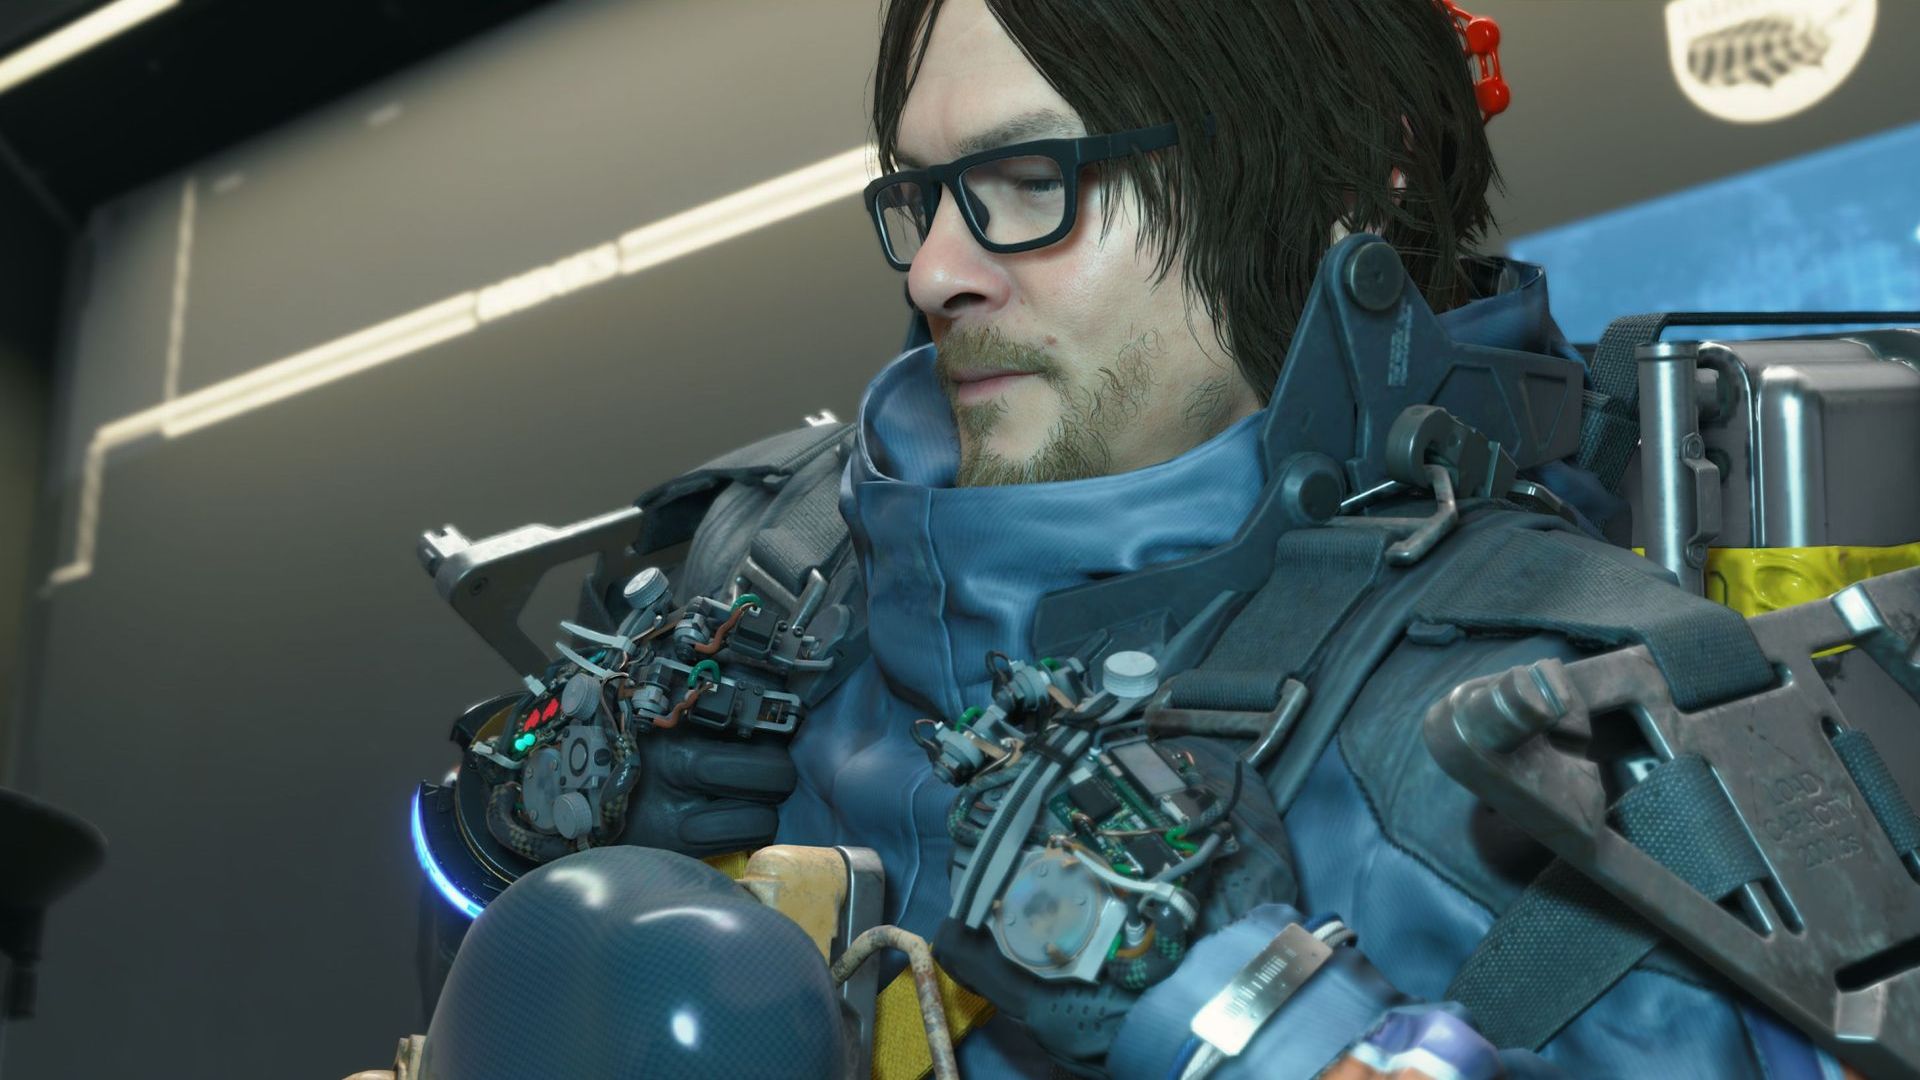 Hideo Kojima Answers Our Questions About Death Stranding - Game